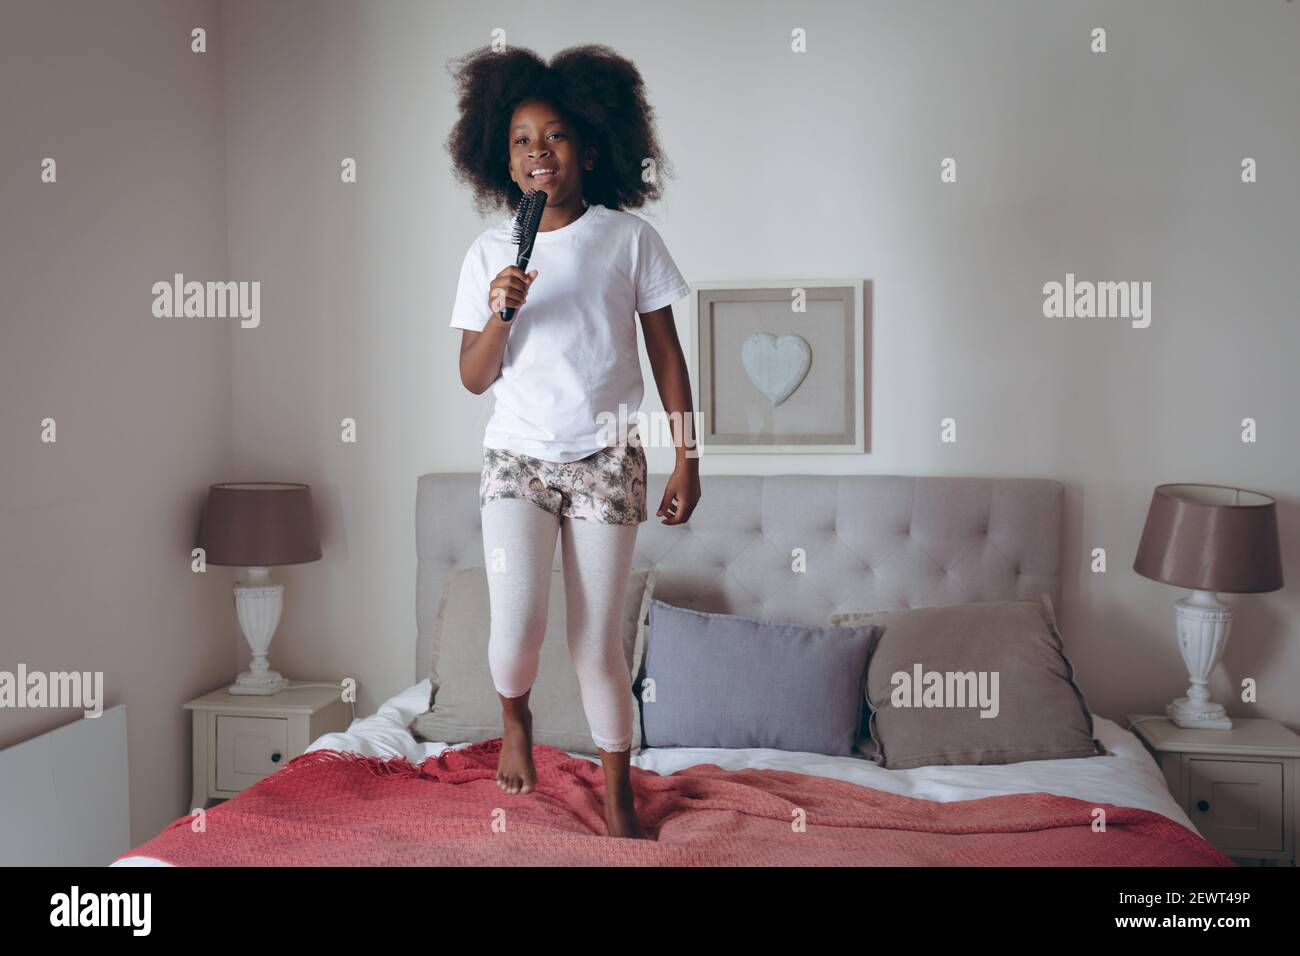 African american girl standing on bed holding hairbrush pretending to sing Stock Photo